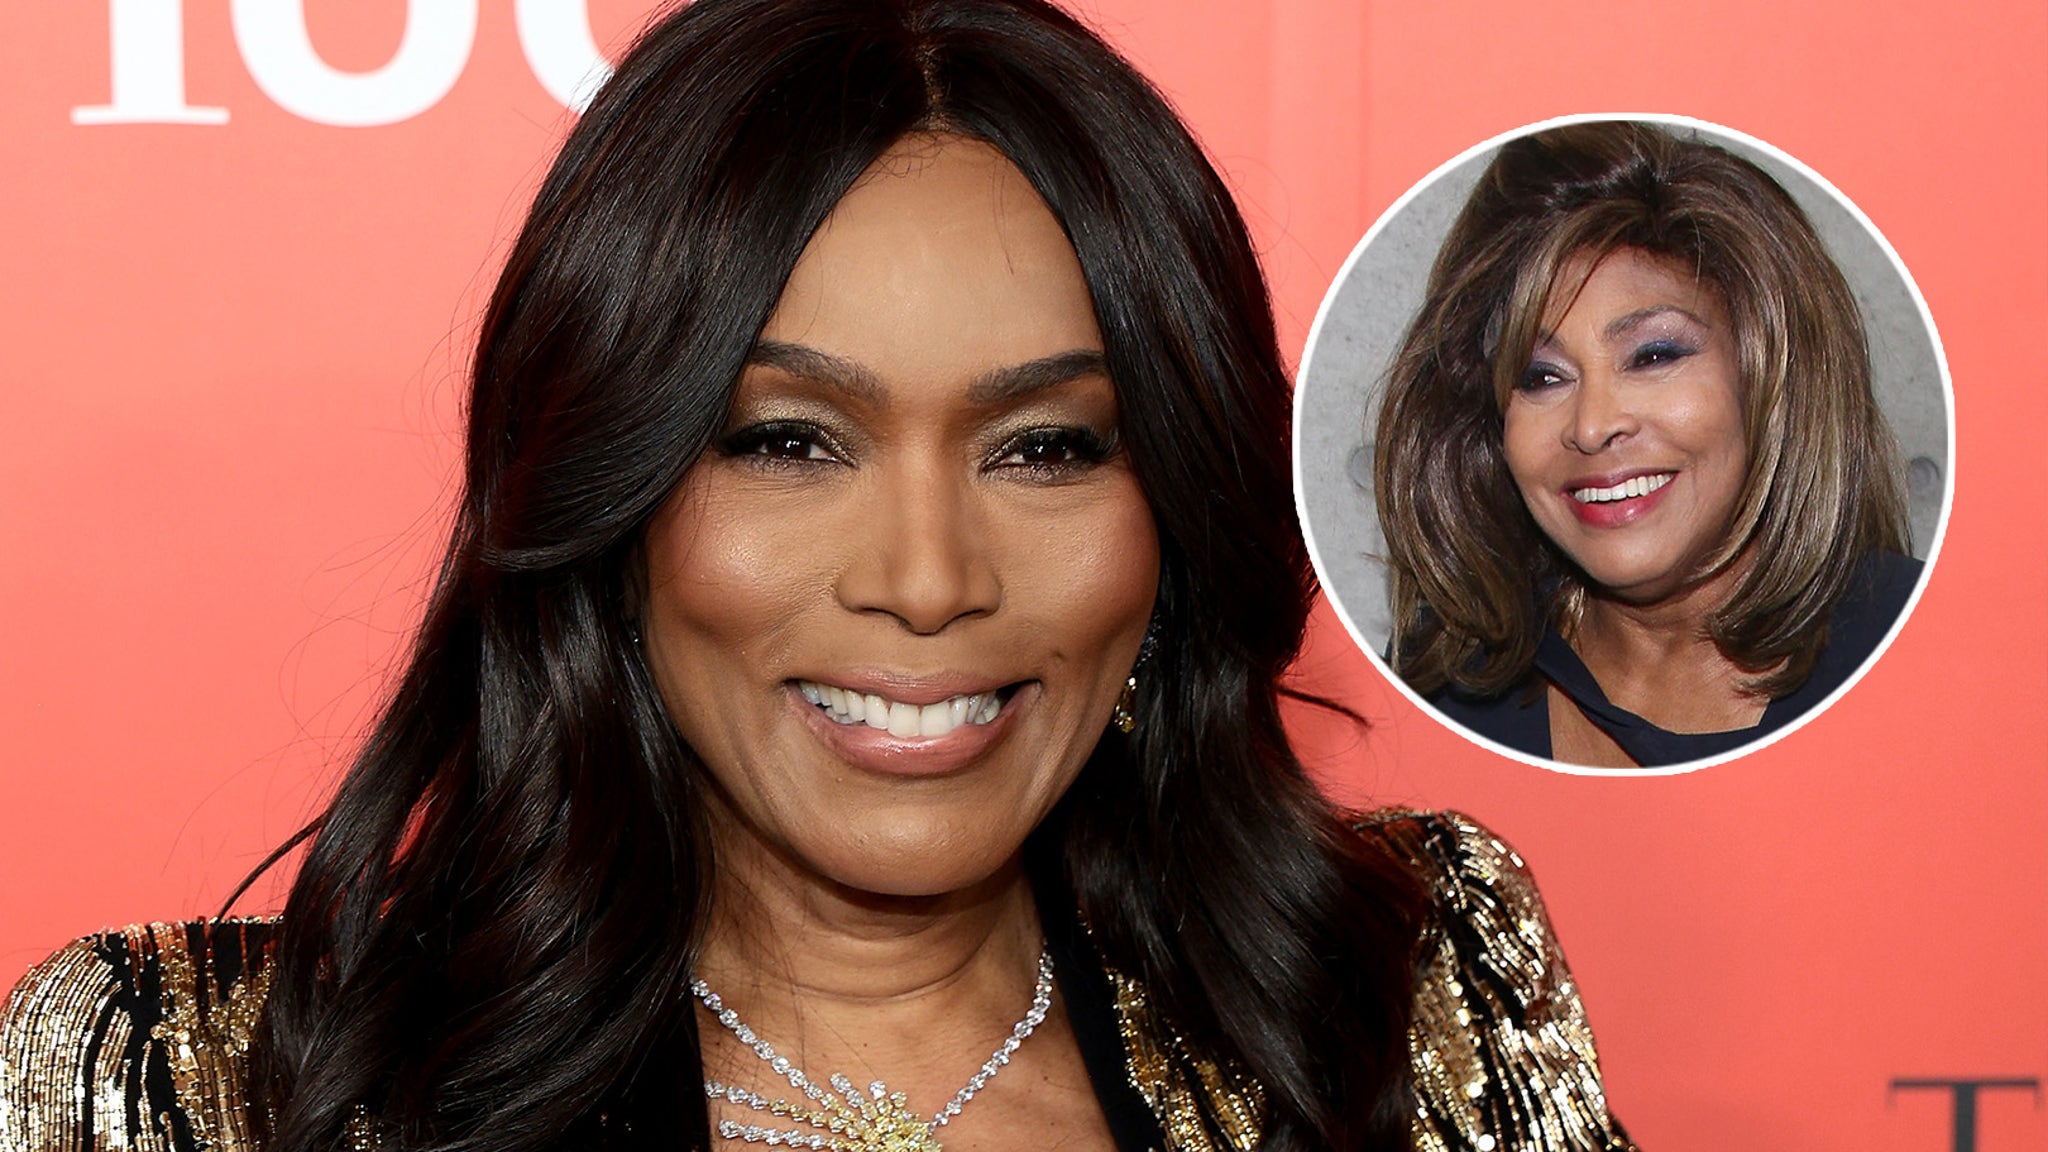 Angela Bassett Shares Final Words, Powerful Tribute to Tina Turner After Portraying Her in Biopic